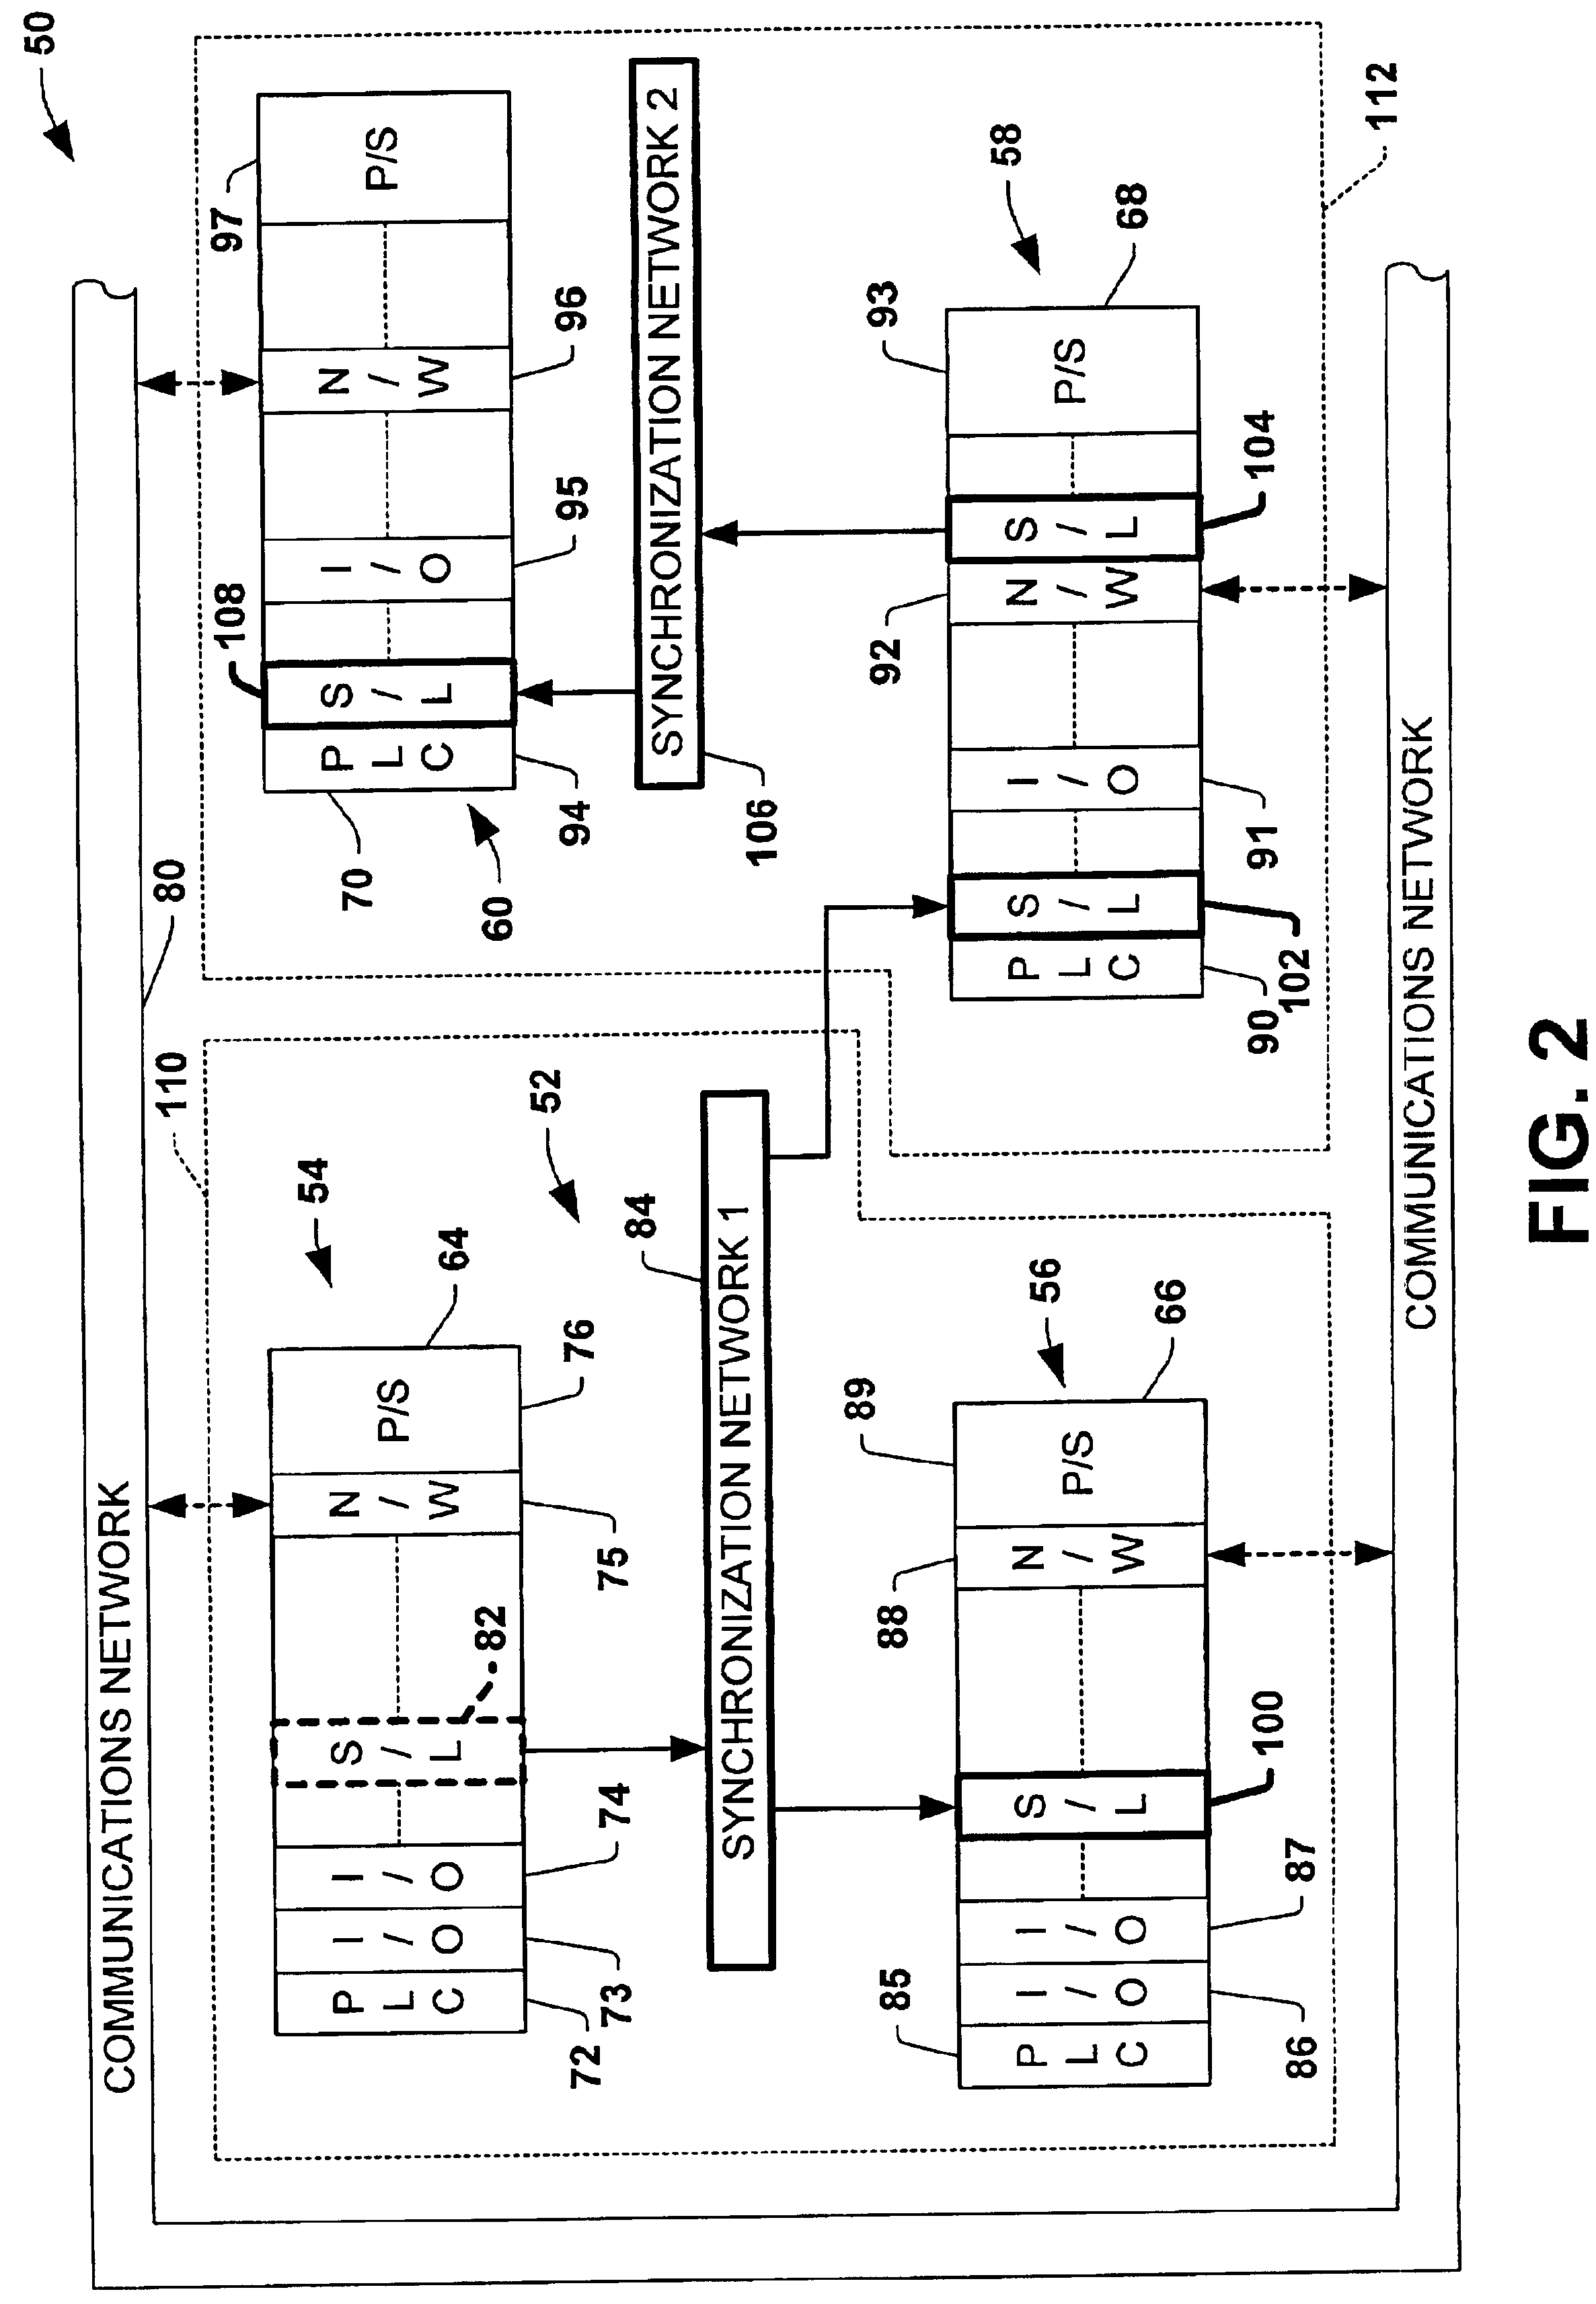 System and method for multi-chassis configurable time synchronization